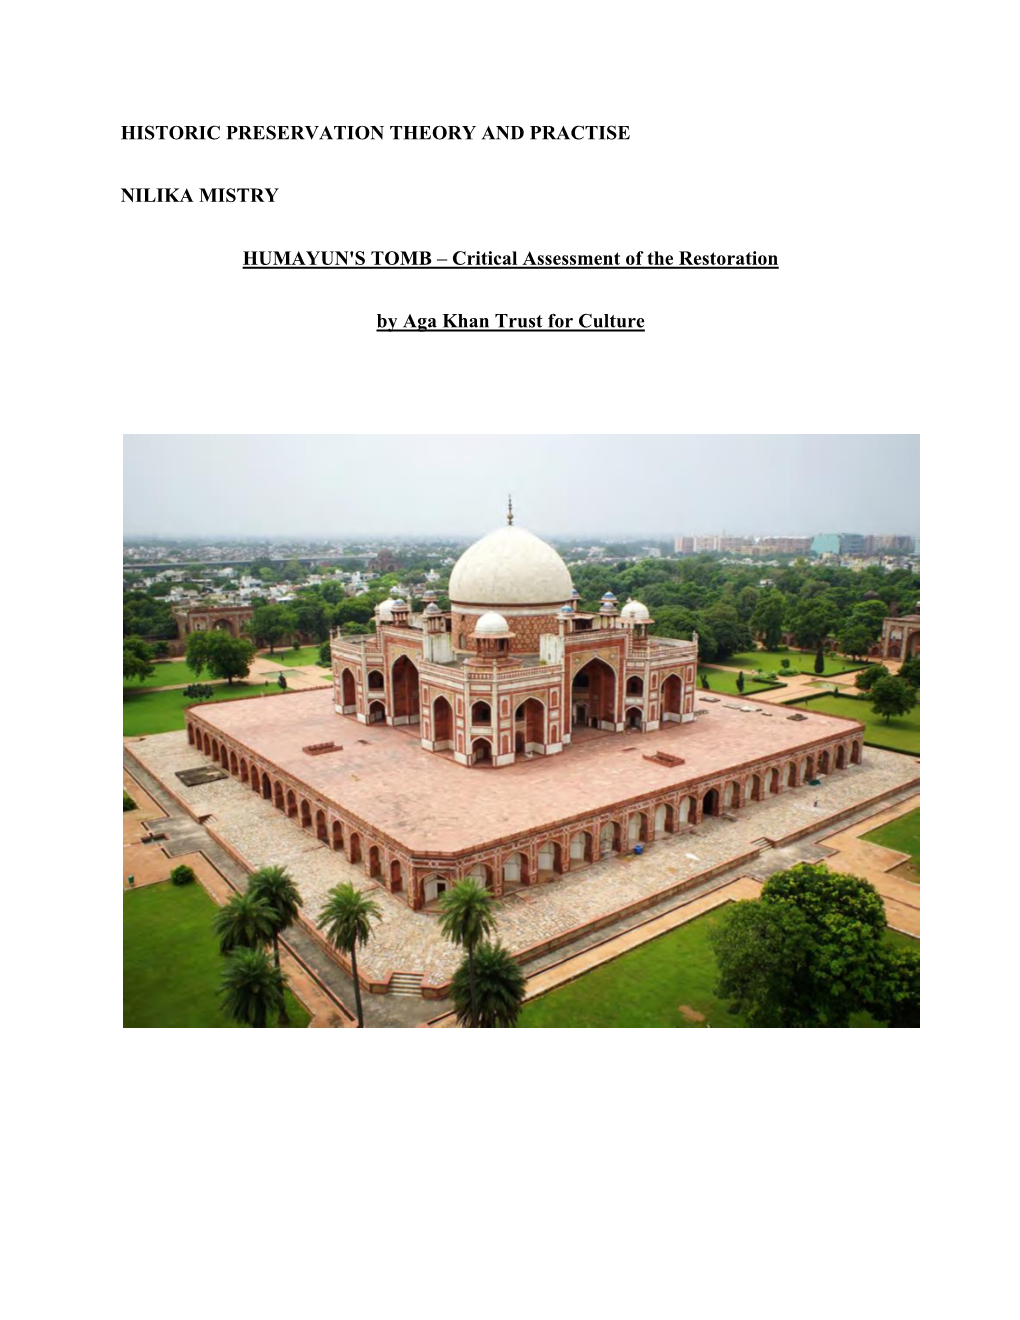 HUMAYUN's TOMB – Critical Assessment of the Restoration